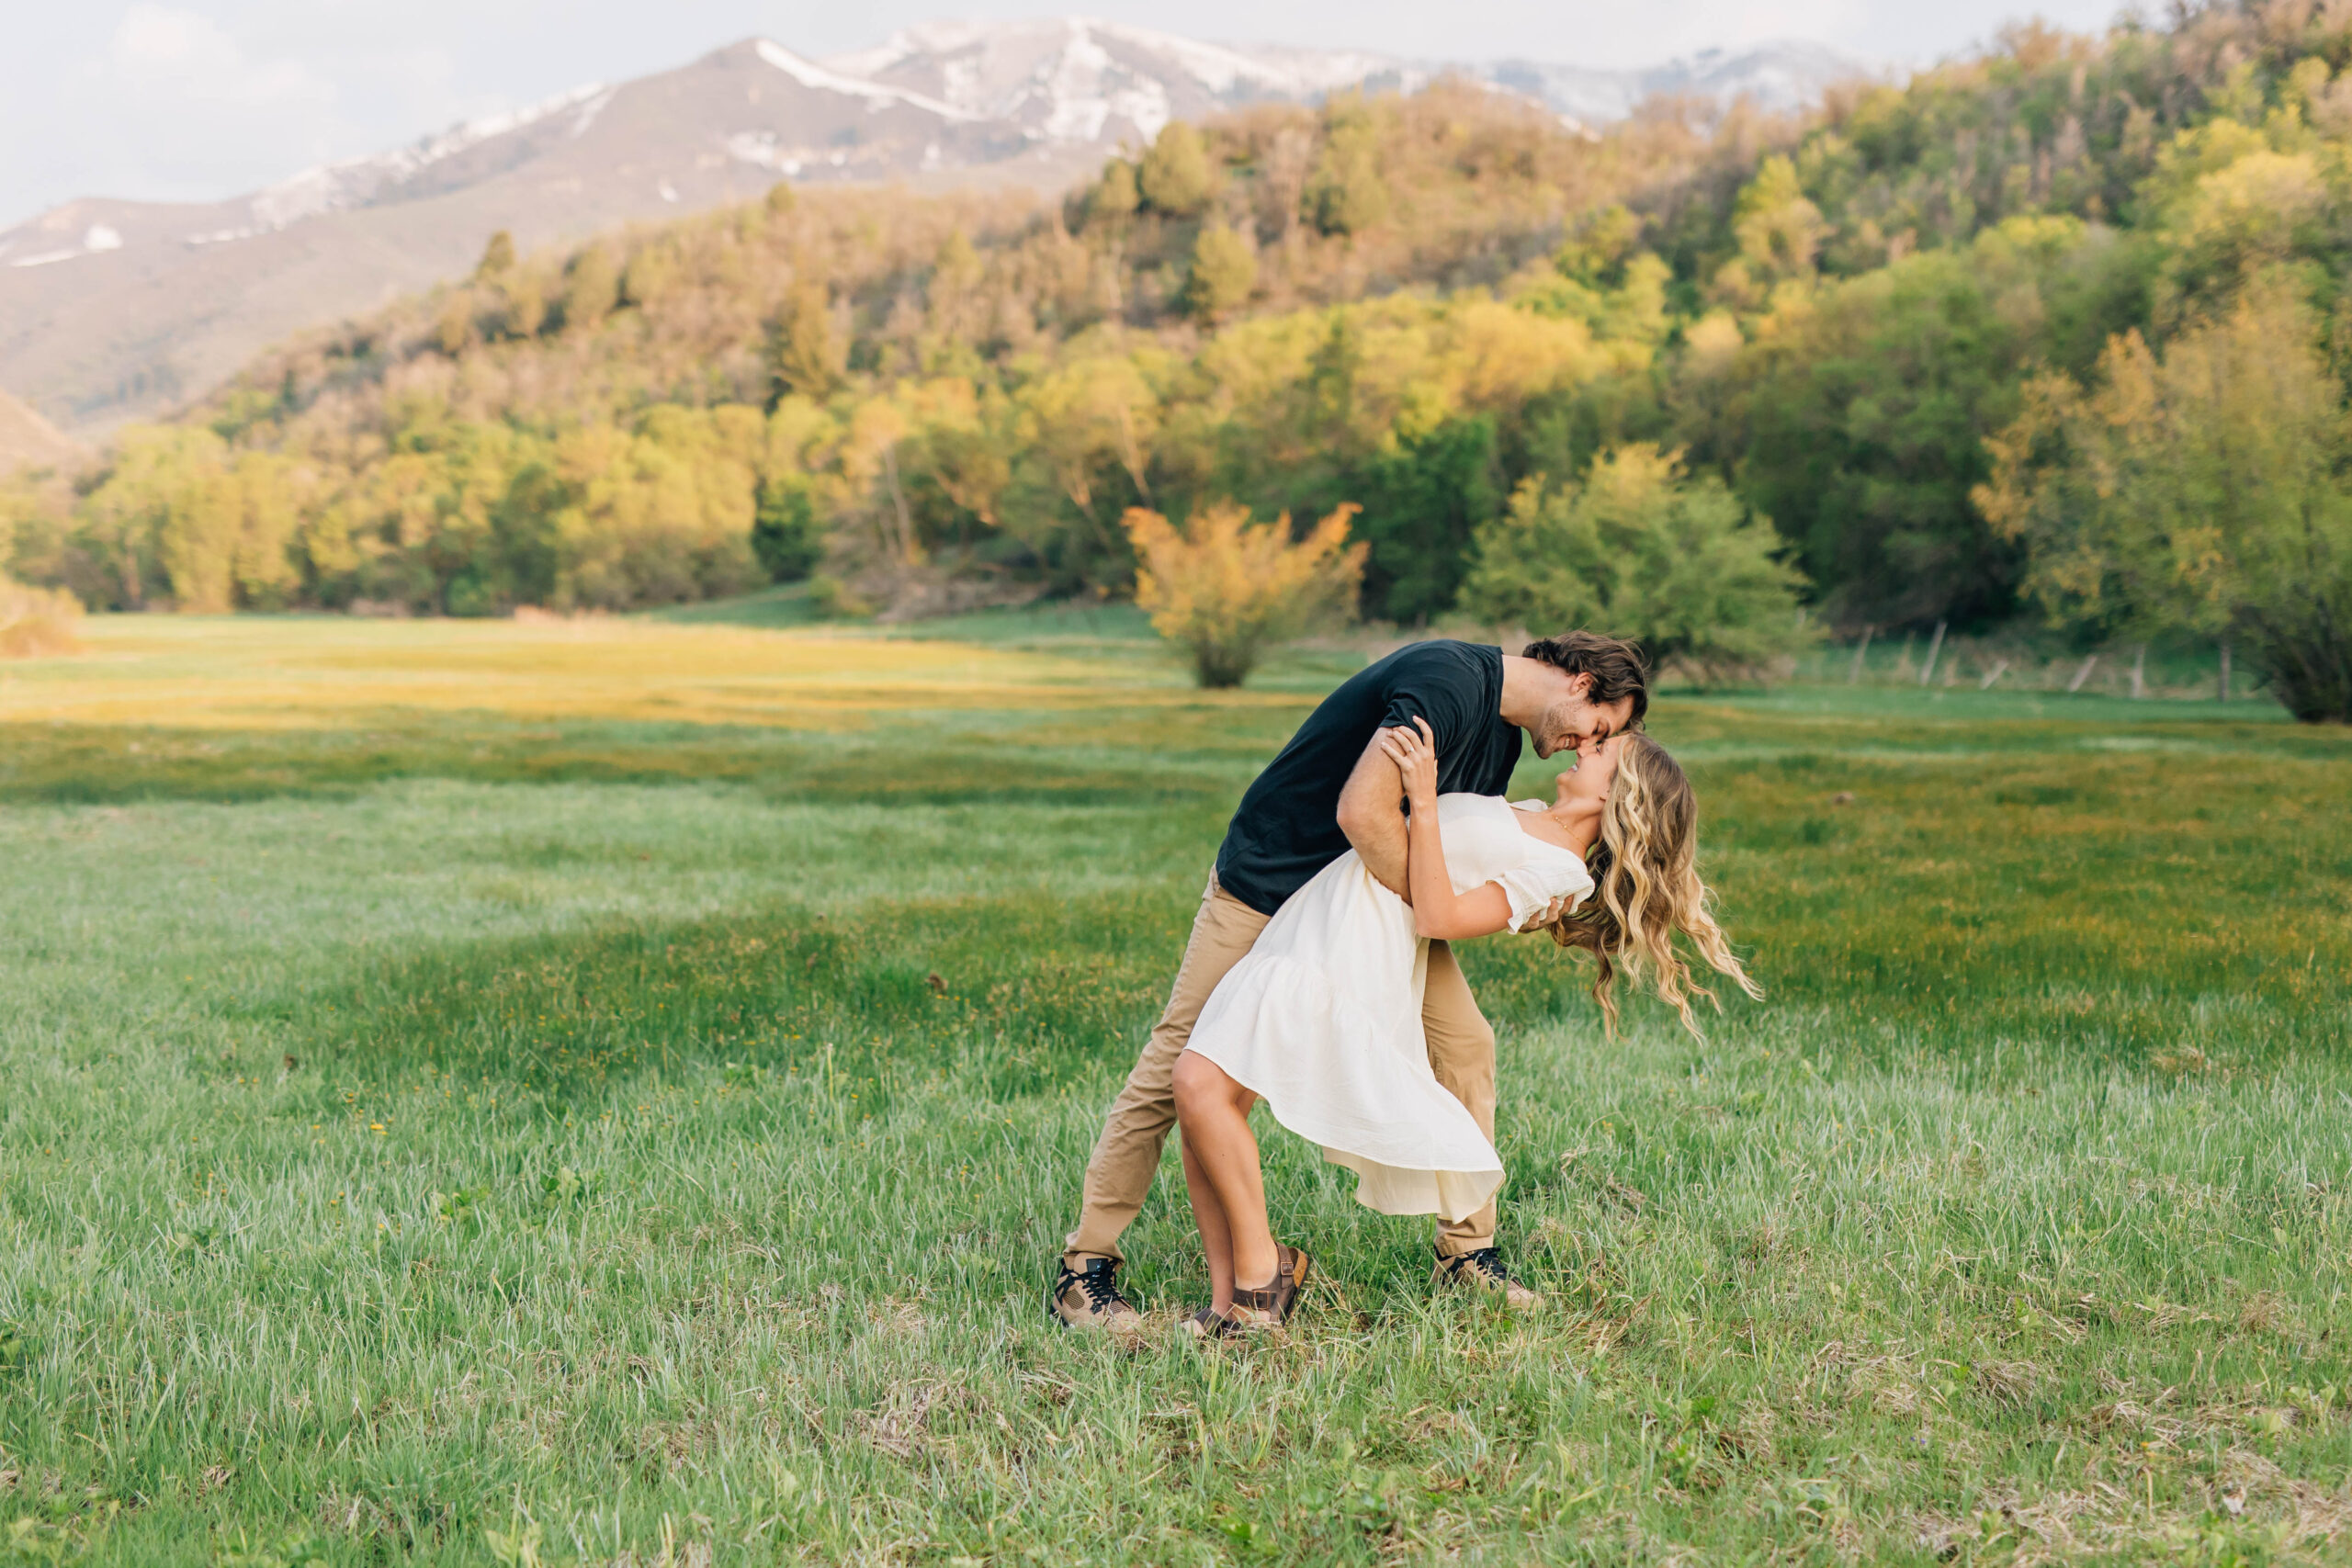 Check out this gorgeous spring Engagement Session at Big Springs Park in Provo canyon! This Utah couple is stunning and great insporation for engagement photos.